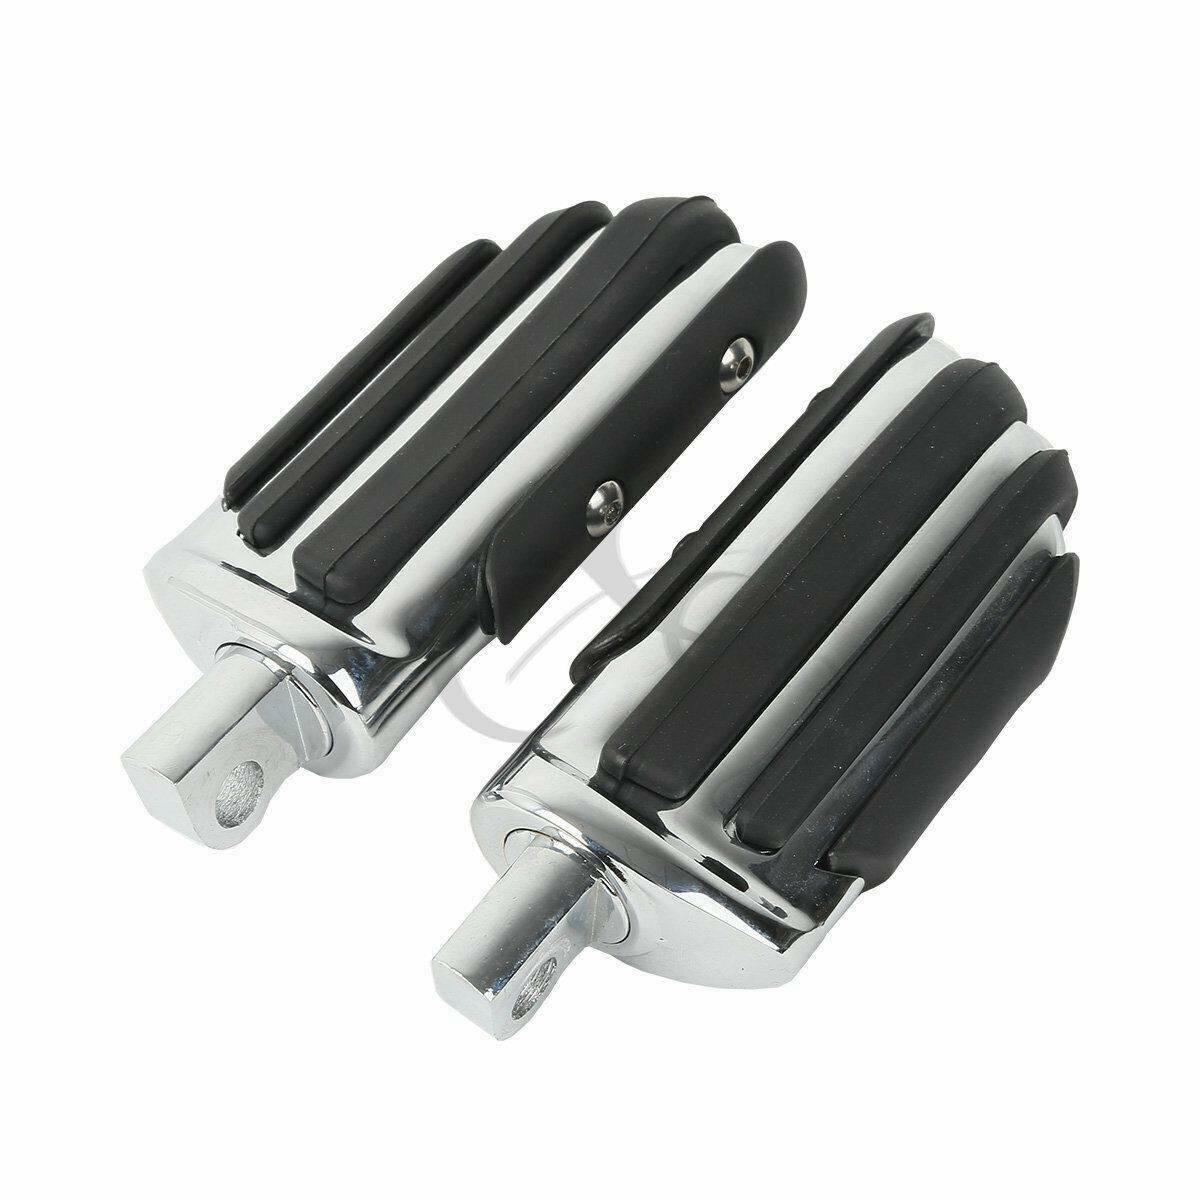 1 1/4" Highway Foot Pegs Mount Fit For Harley Touring Road Glide Engine Guards - Moto Life Products